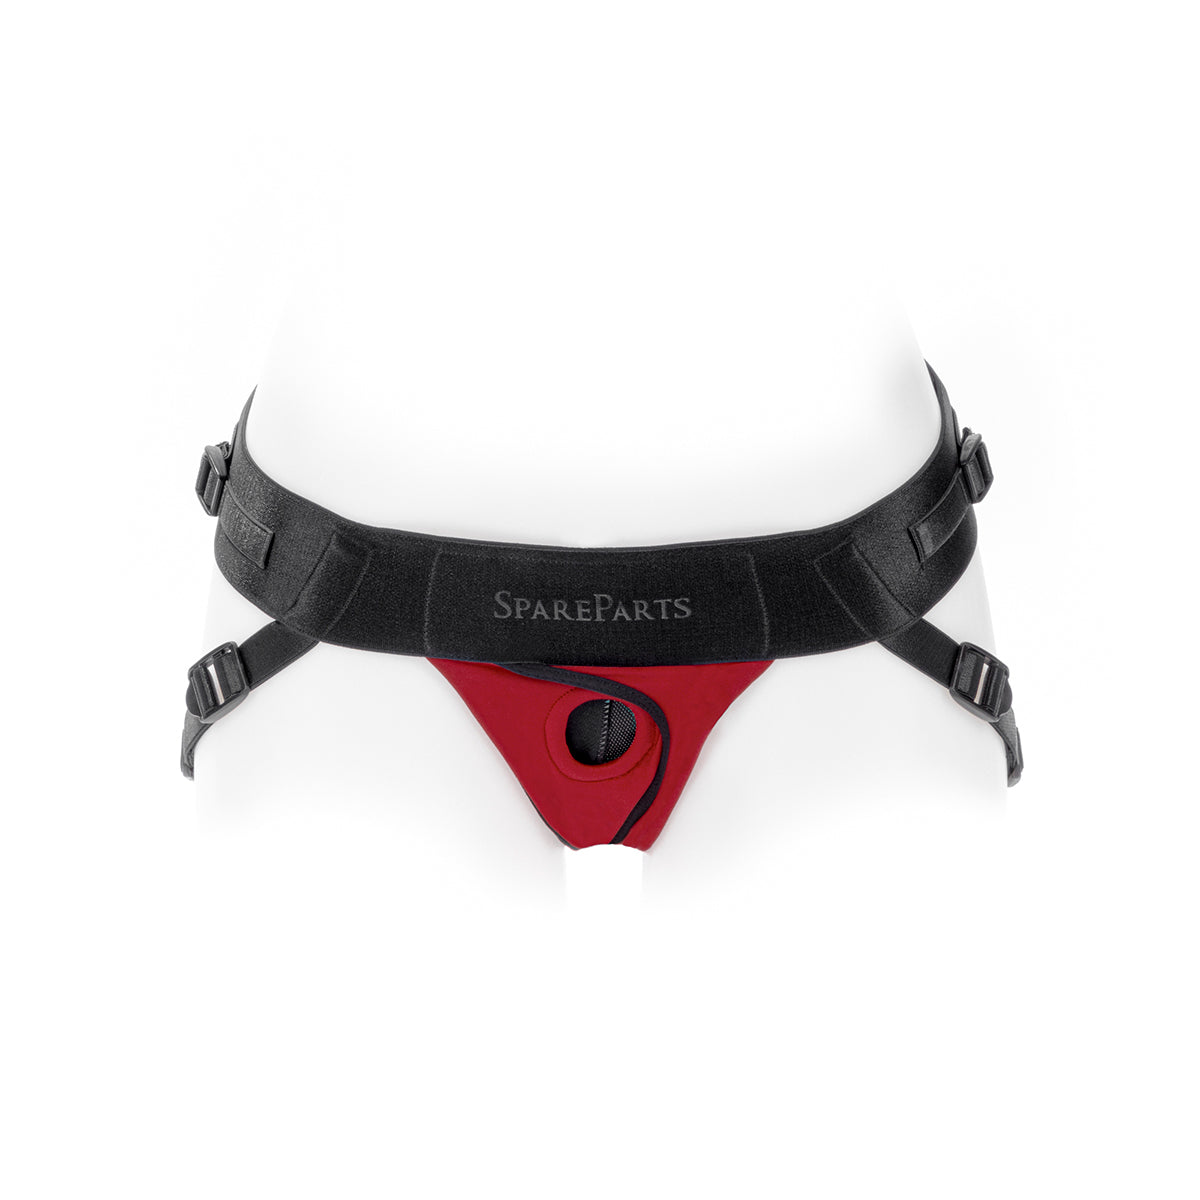 SpareParts Joque Cover Undwr Harness Red (Double Strap) Size A Nylon